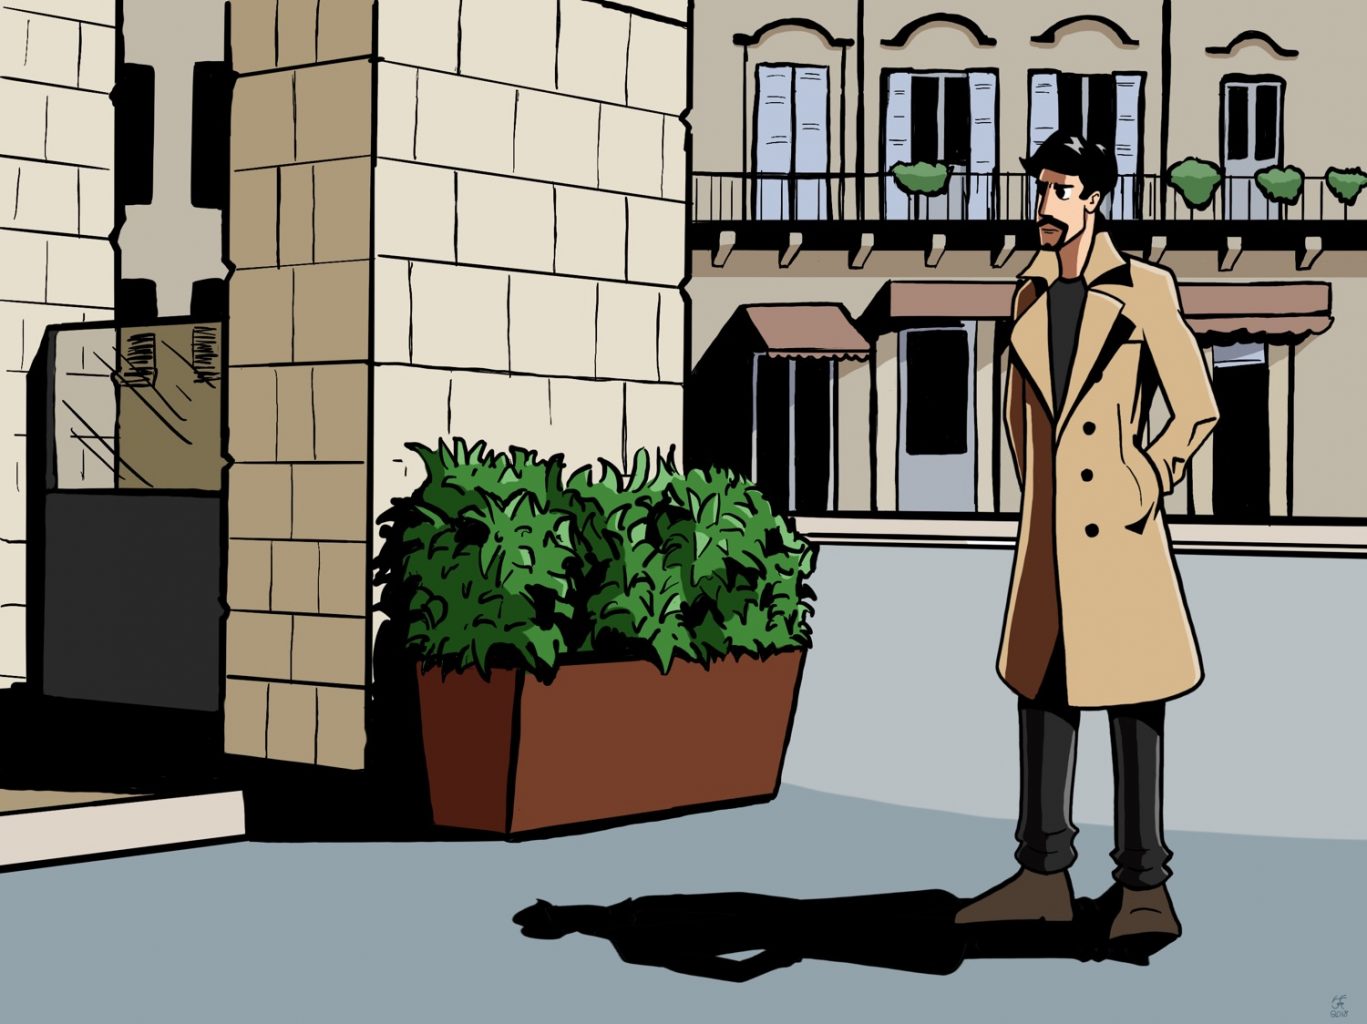 An illustration of a character with a goatee and a trench coat standing in an Italian square